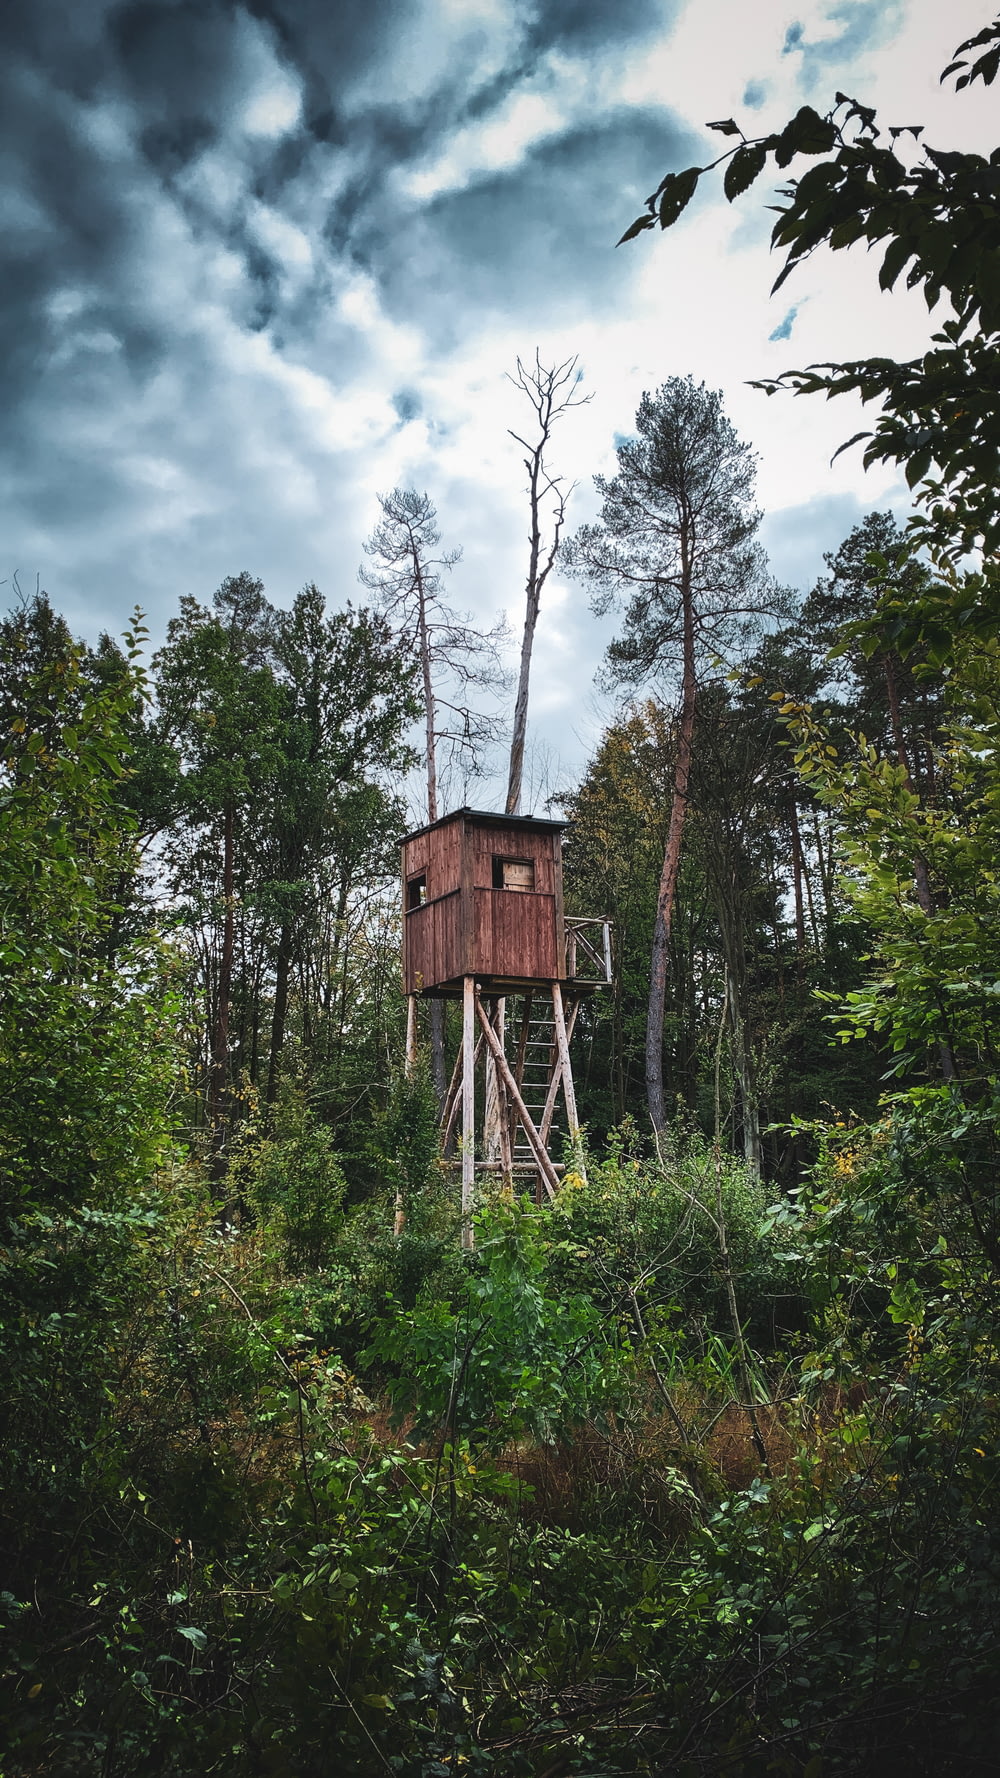 a wooden tower in the middle of a forest